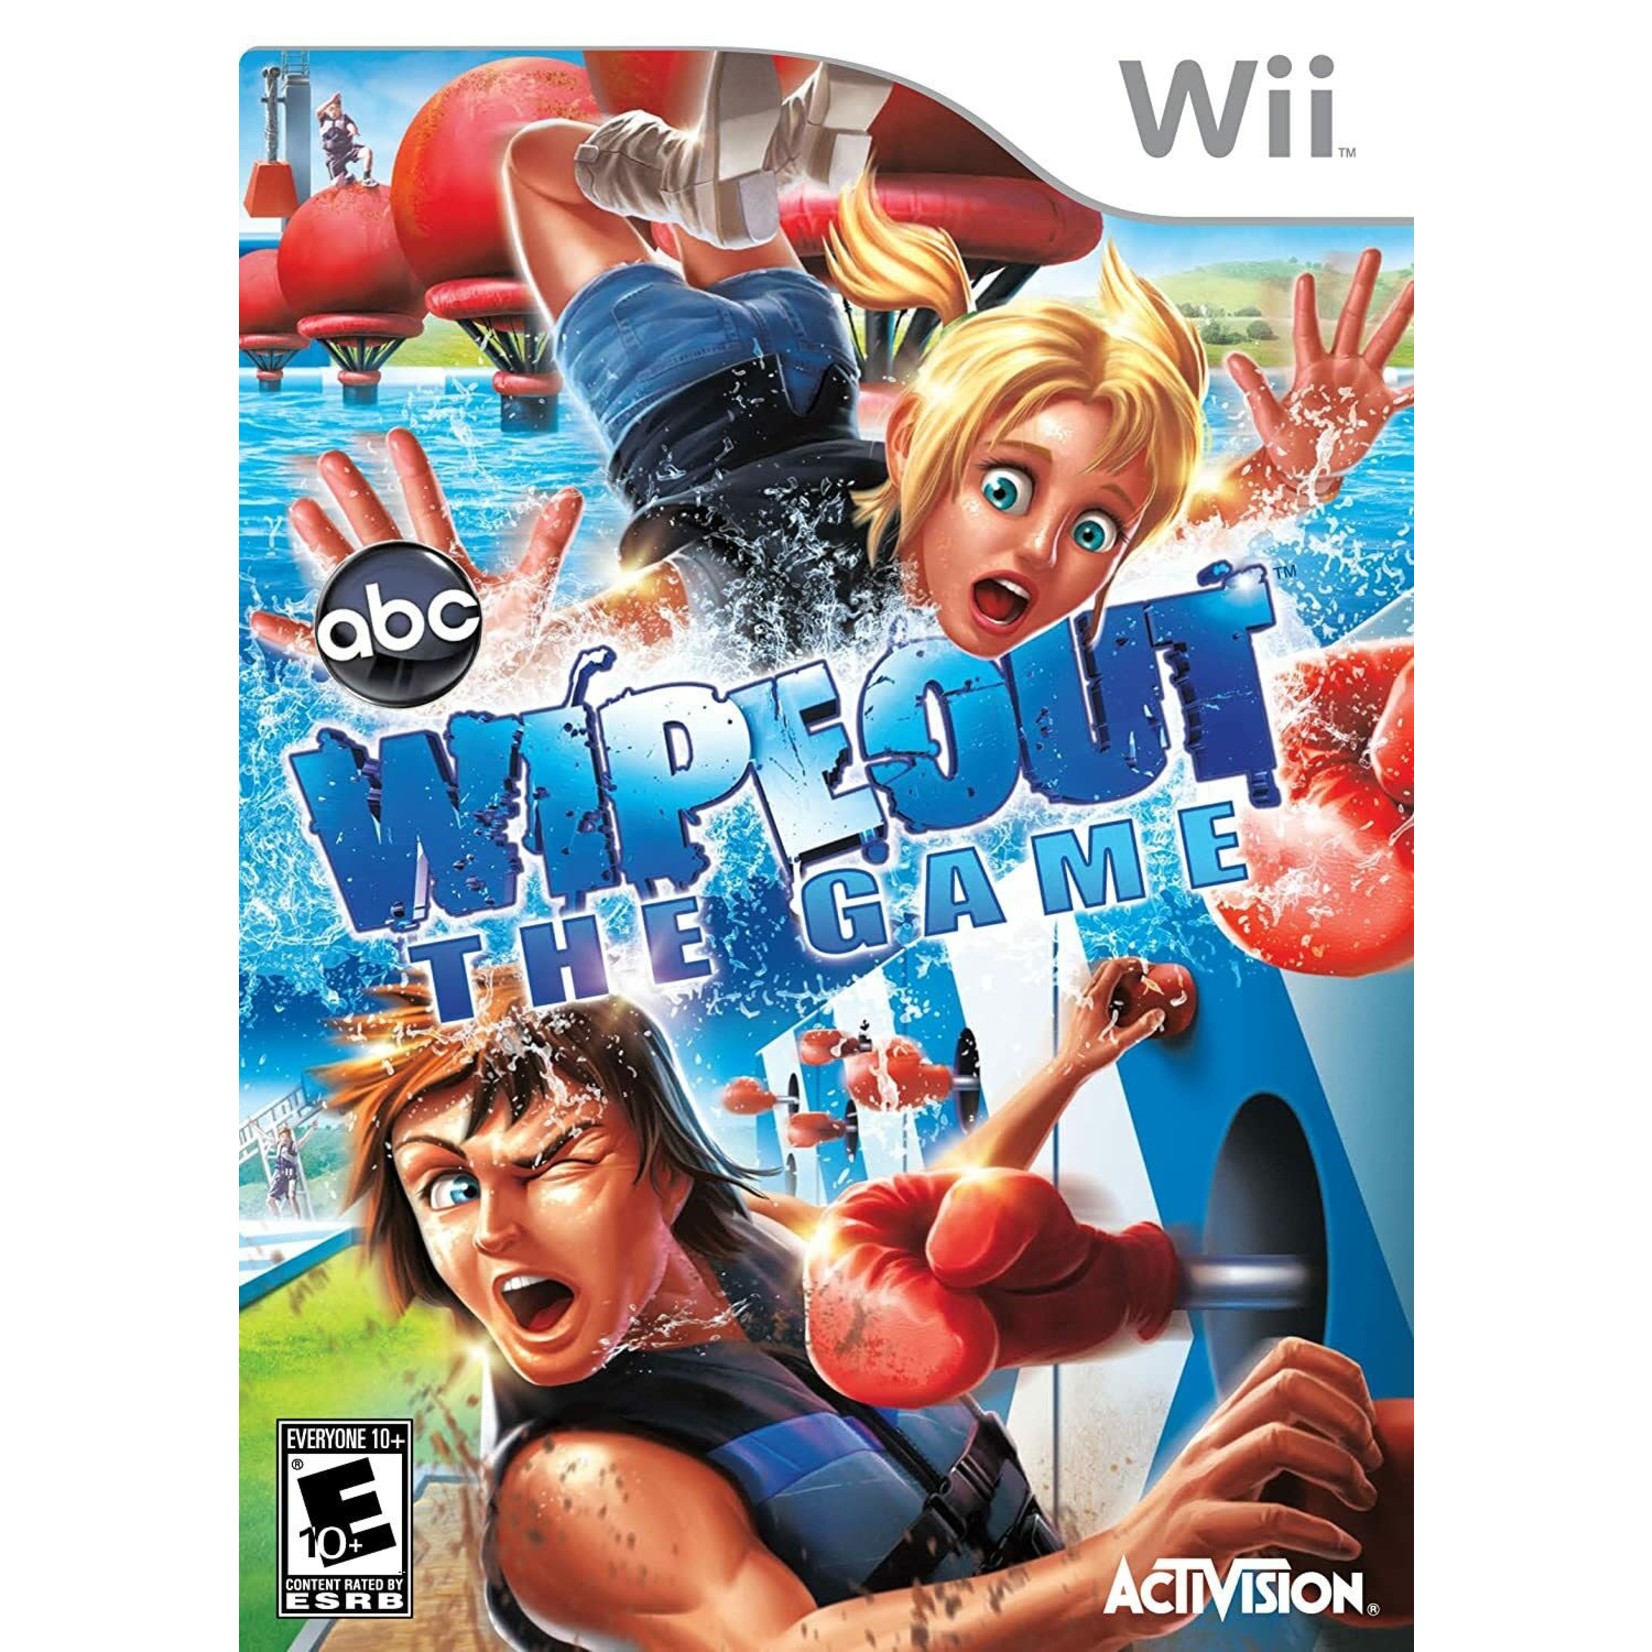 WIIUSD-WIPEOUT THE GAME